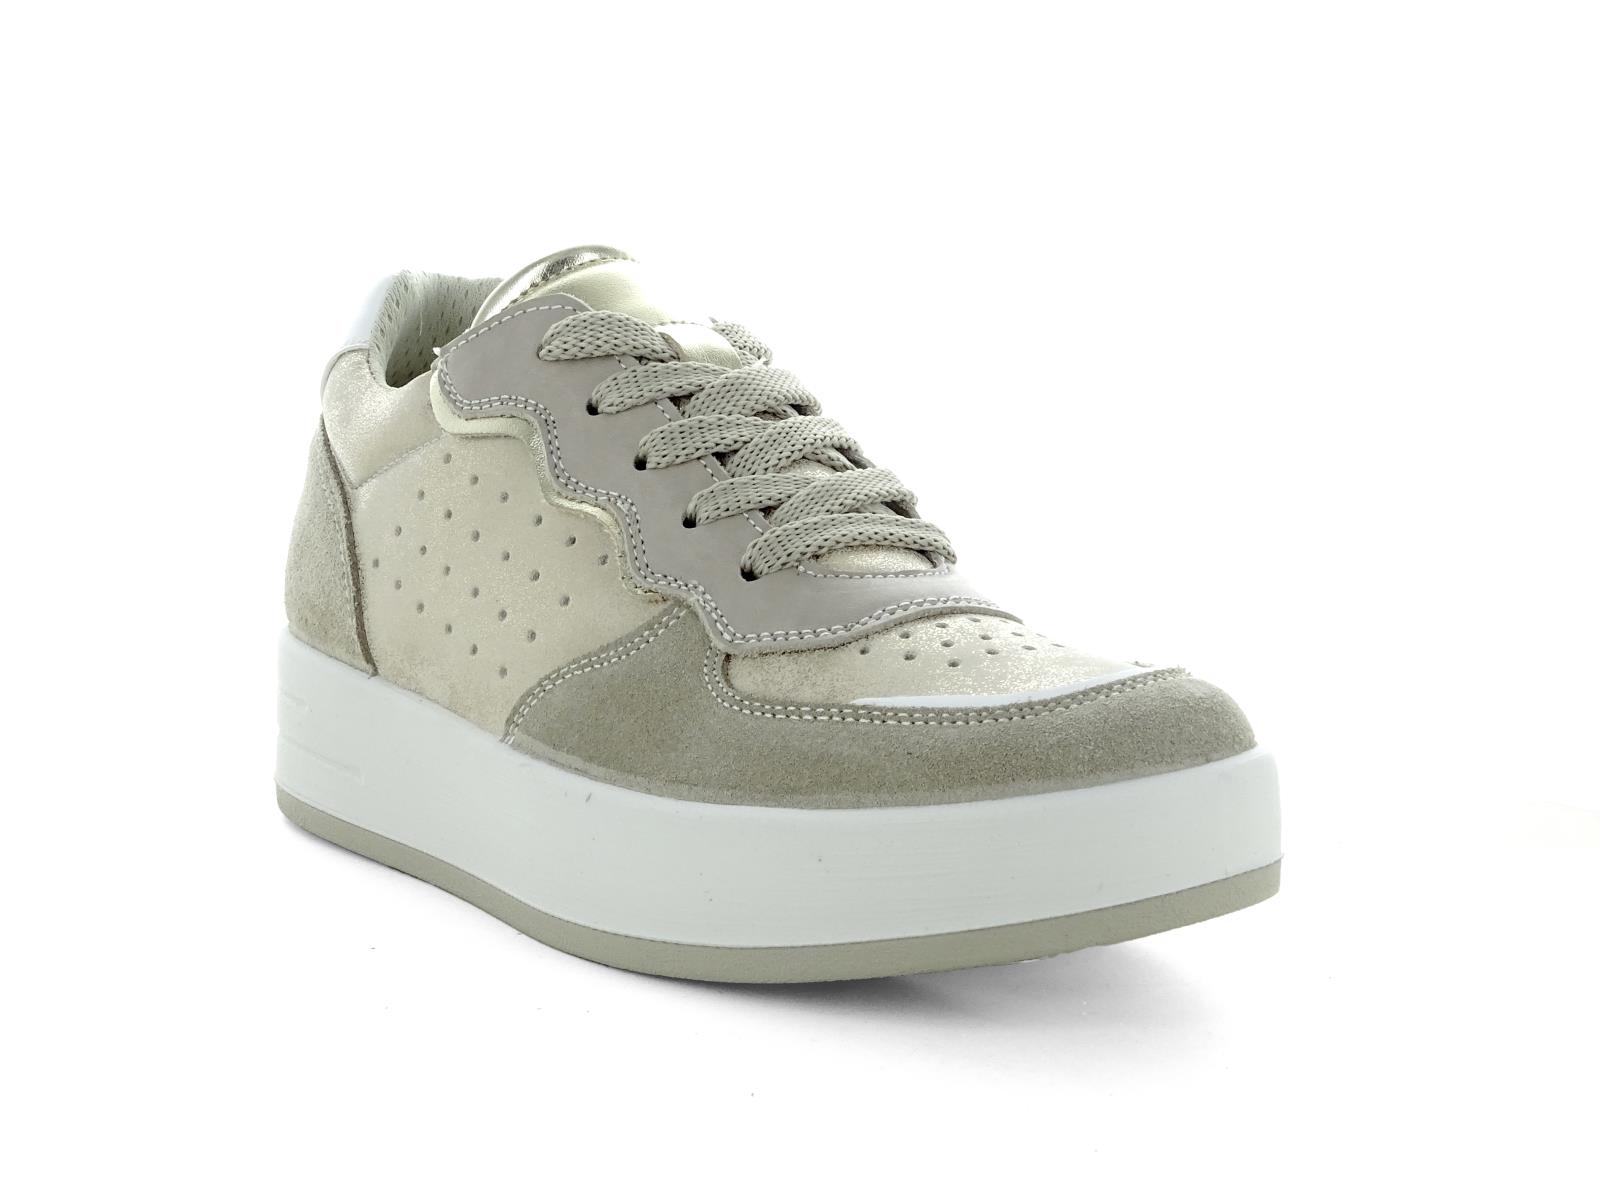 IMAC 556590 SNEAKERS DONNA